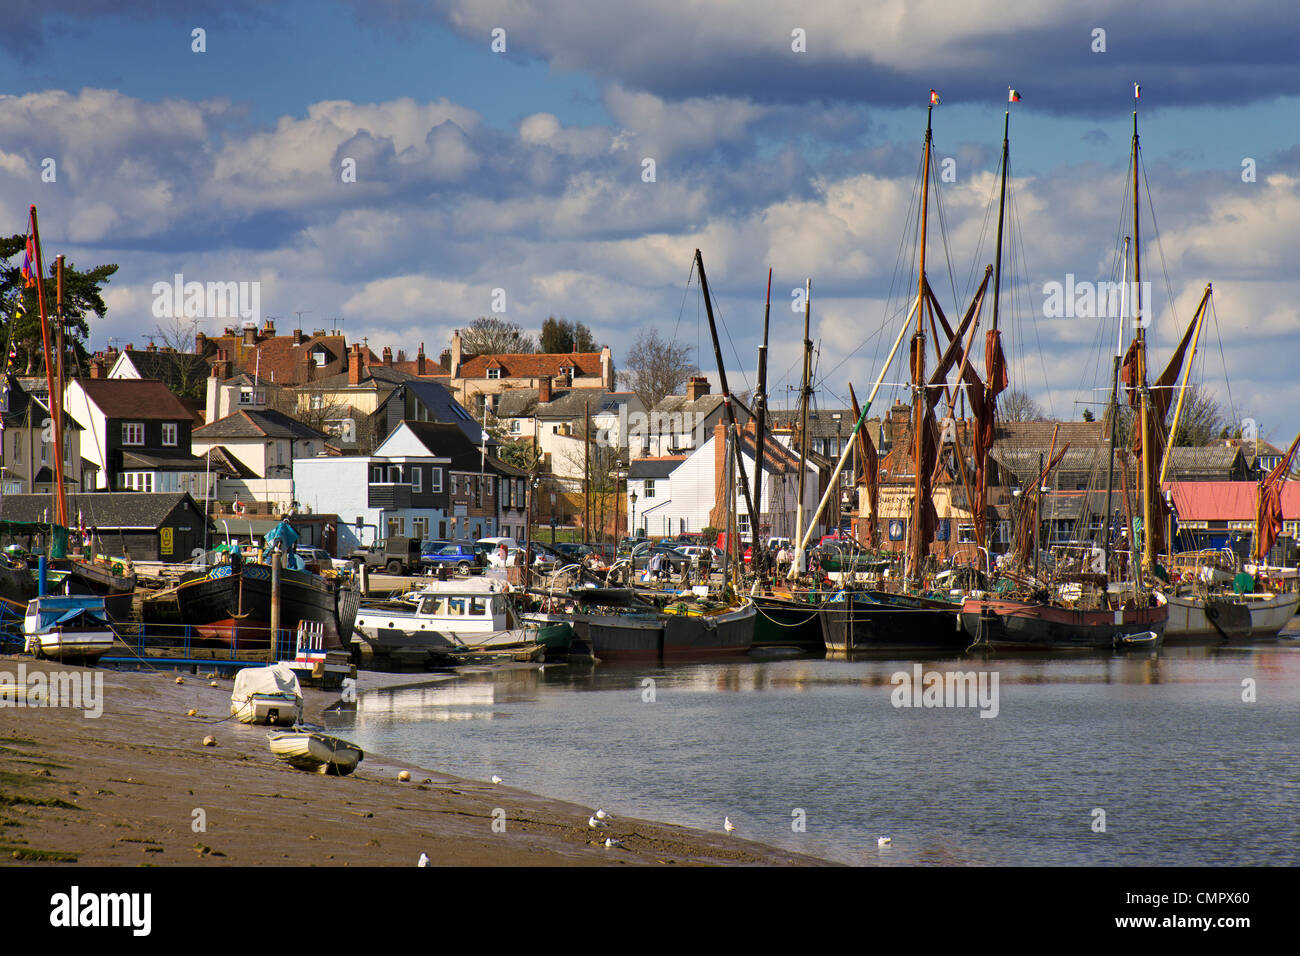 The Essex town of Maldon on the Blackwater Estuary, with the town and barges visible. Stock Photo